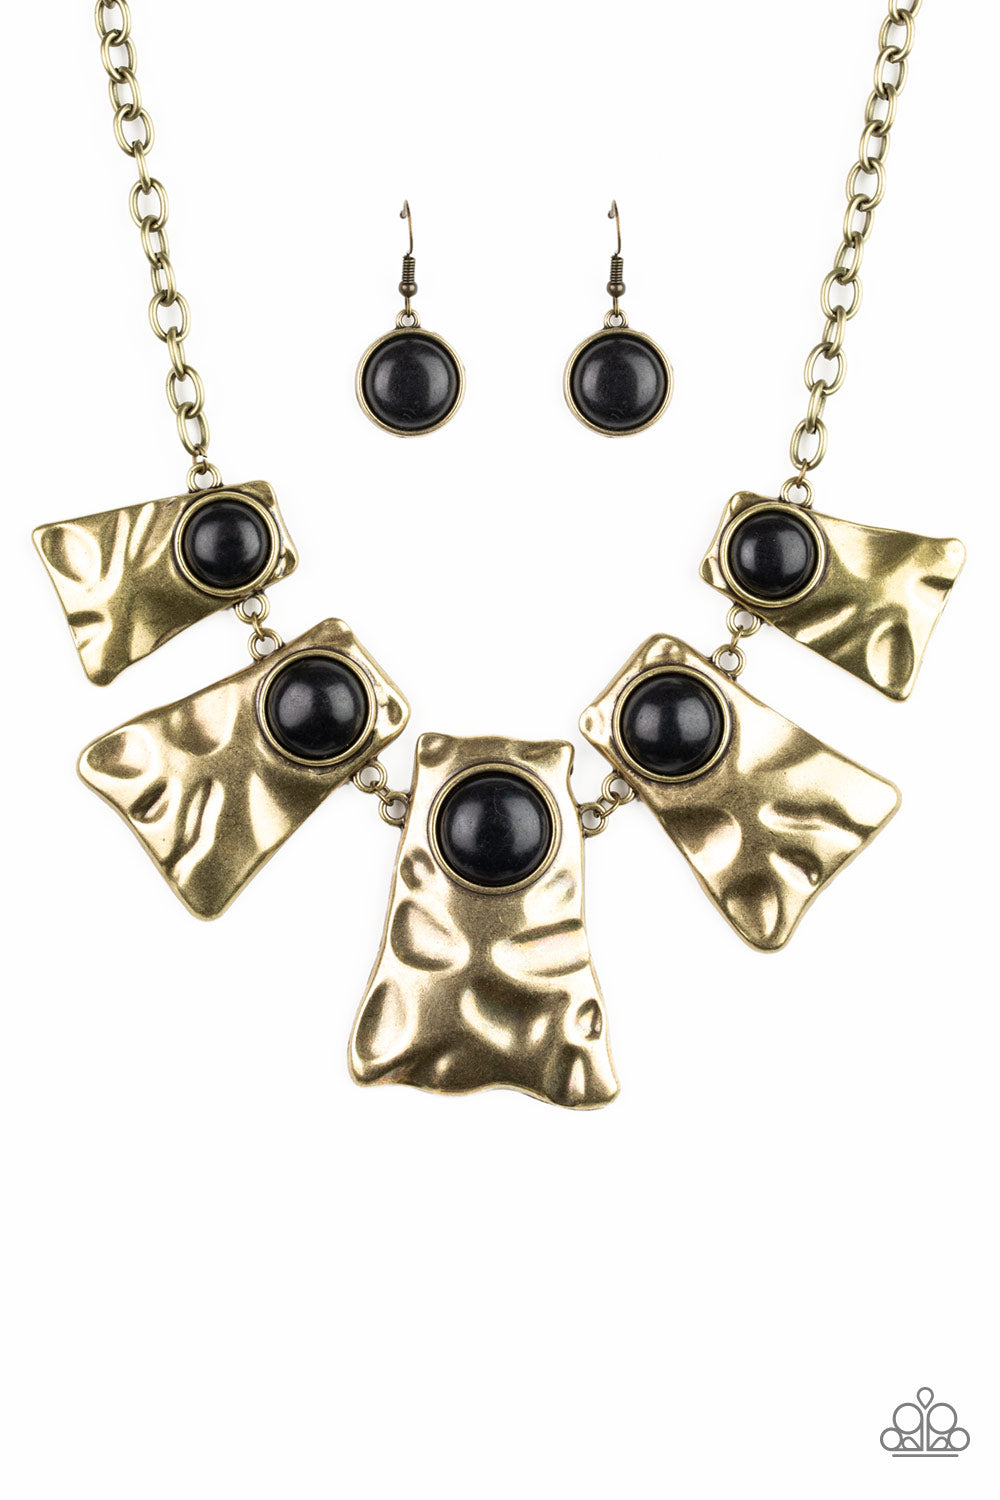 Paparazzi Accessories - Cougar - Brass Necklace